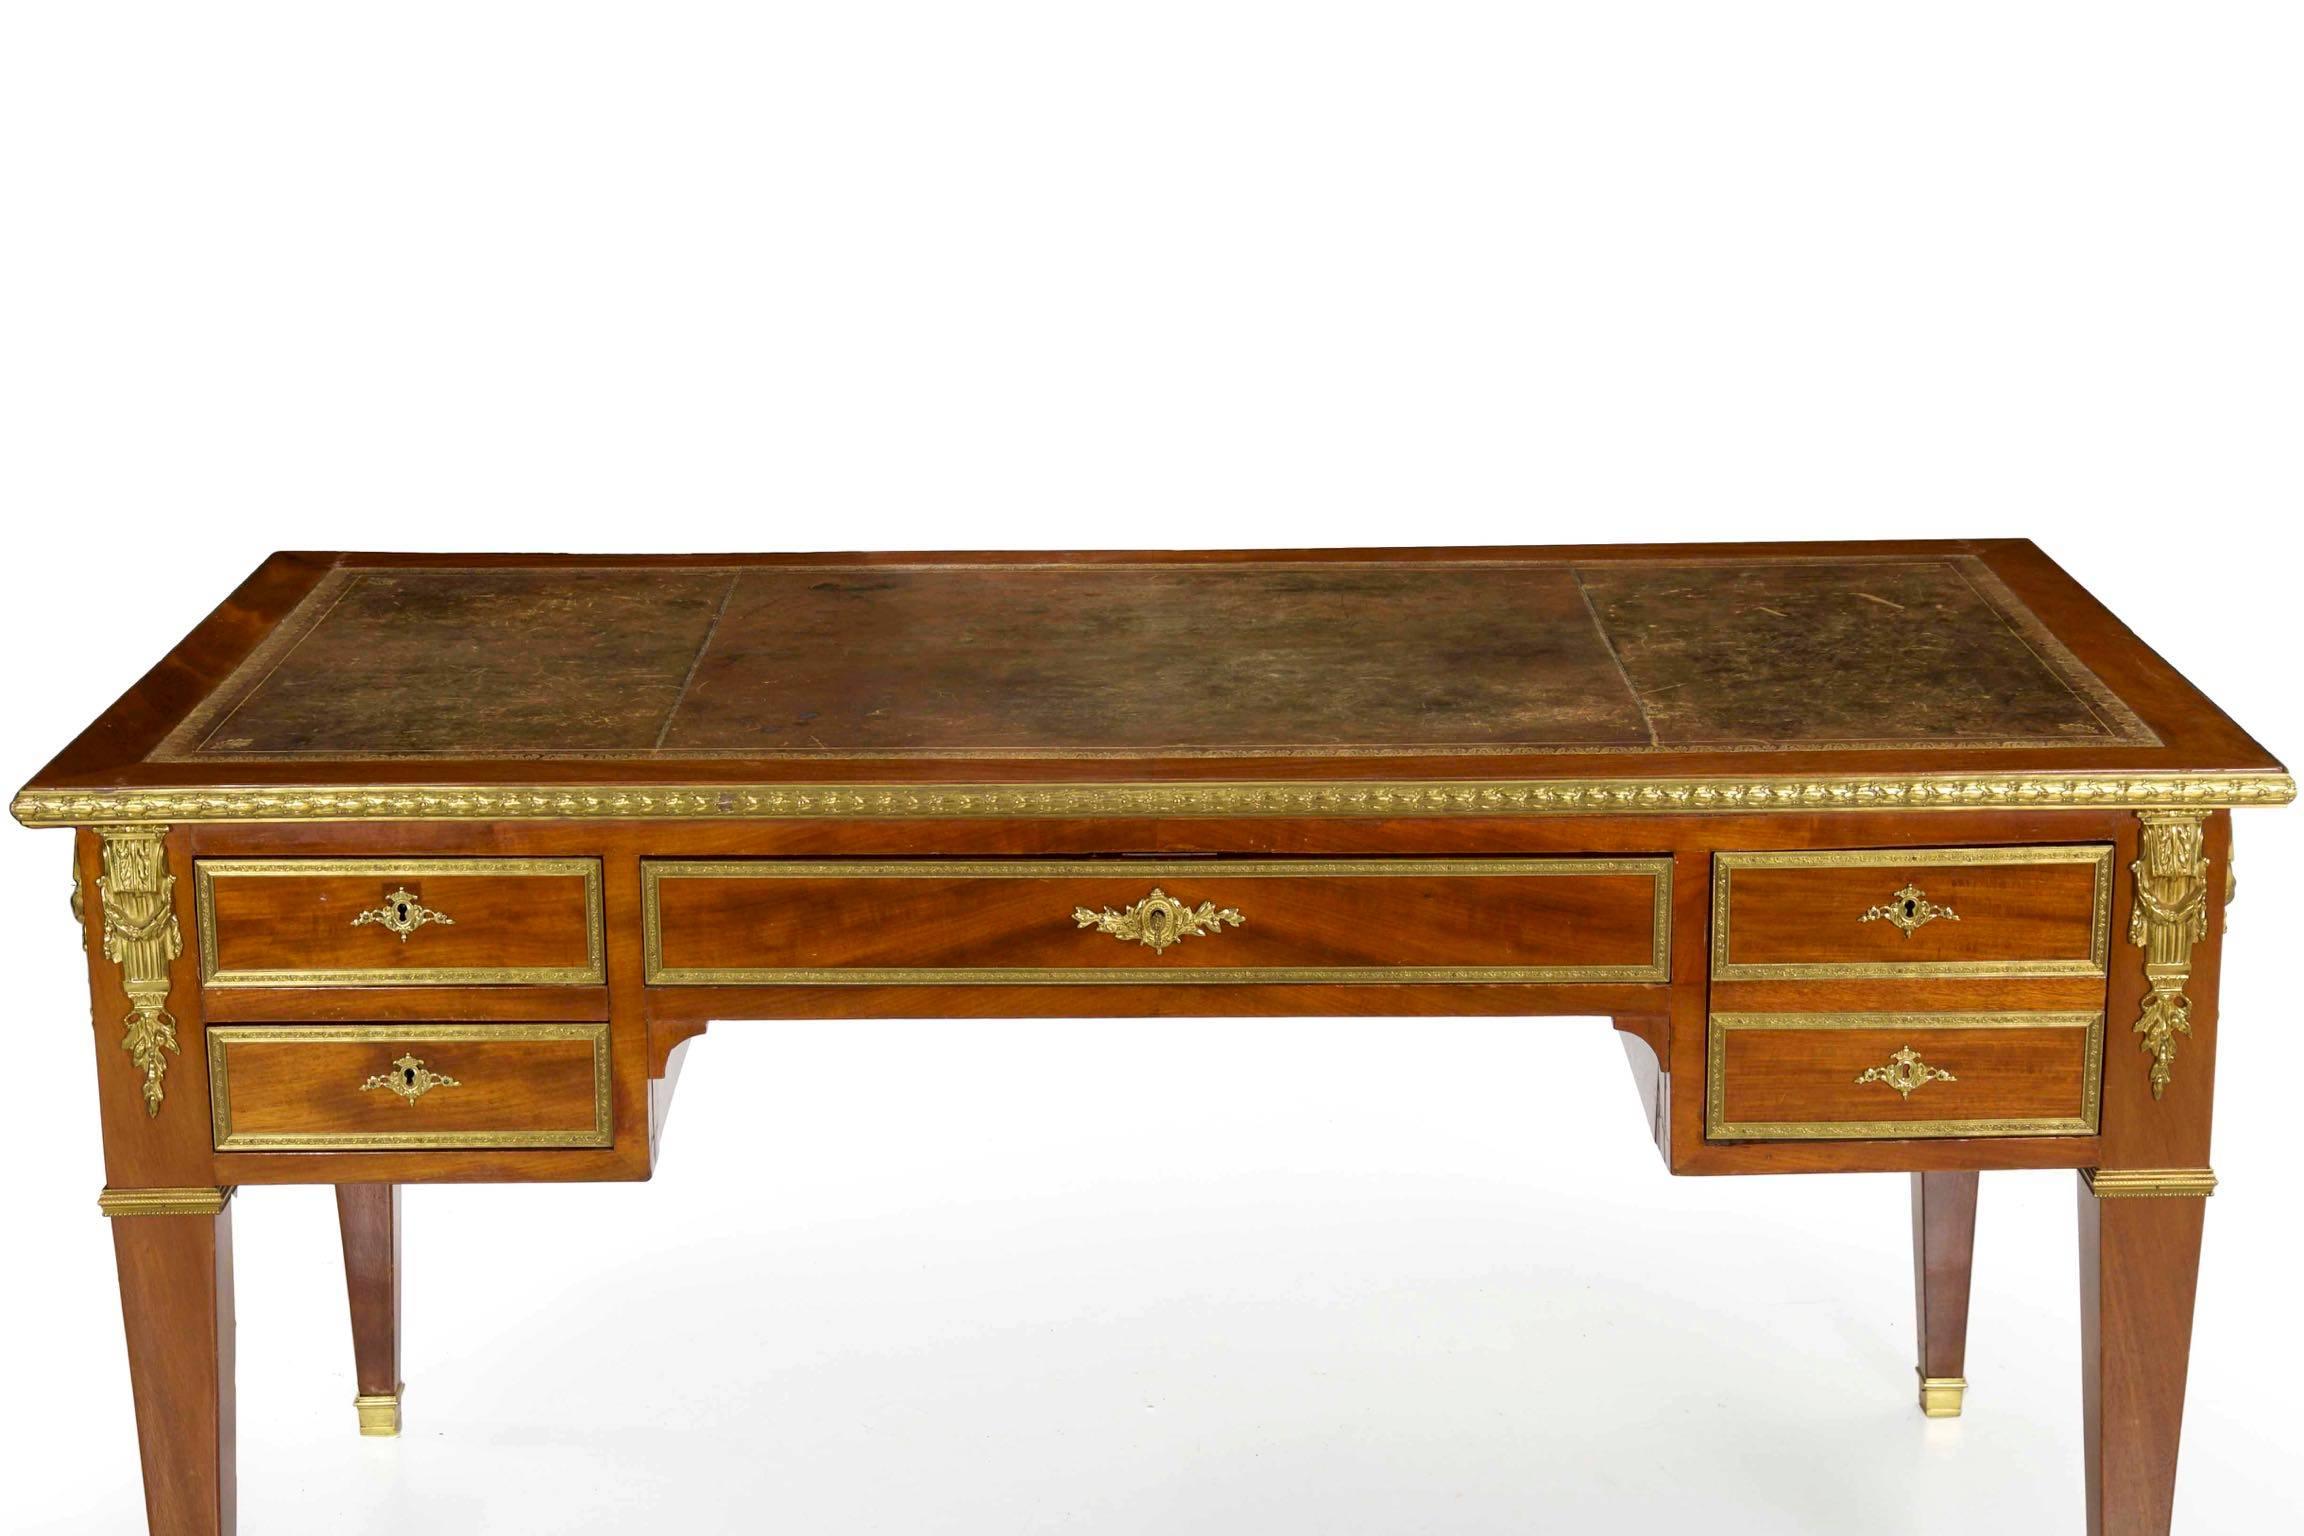 This inordinately fine bureau plat from the last quarter of the 19th century is a powerful and commanding form. The writing surface is so rich and attractive with a century of light wear and use stained into the cognac leather, a beautiful gilt